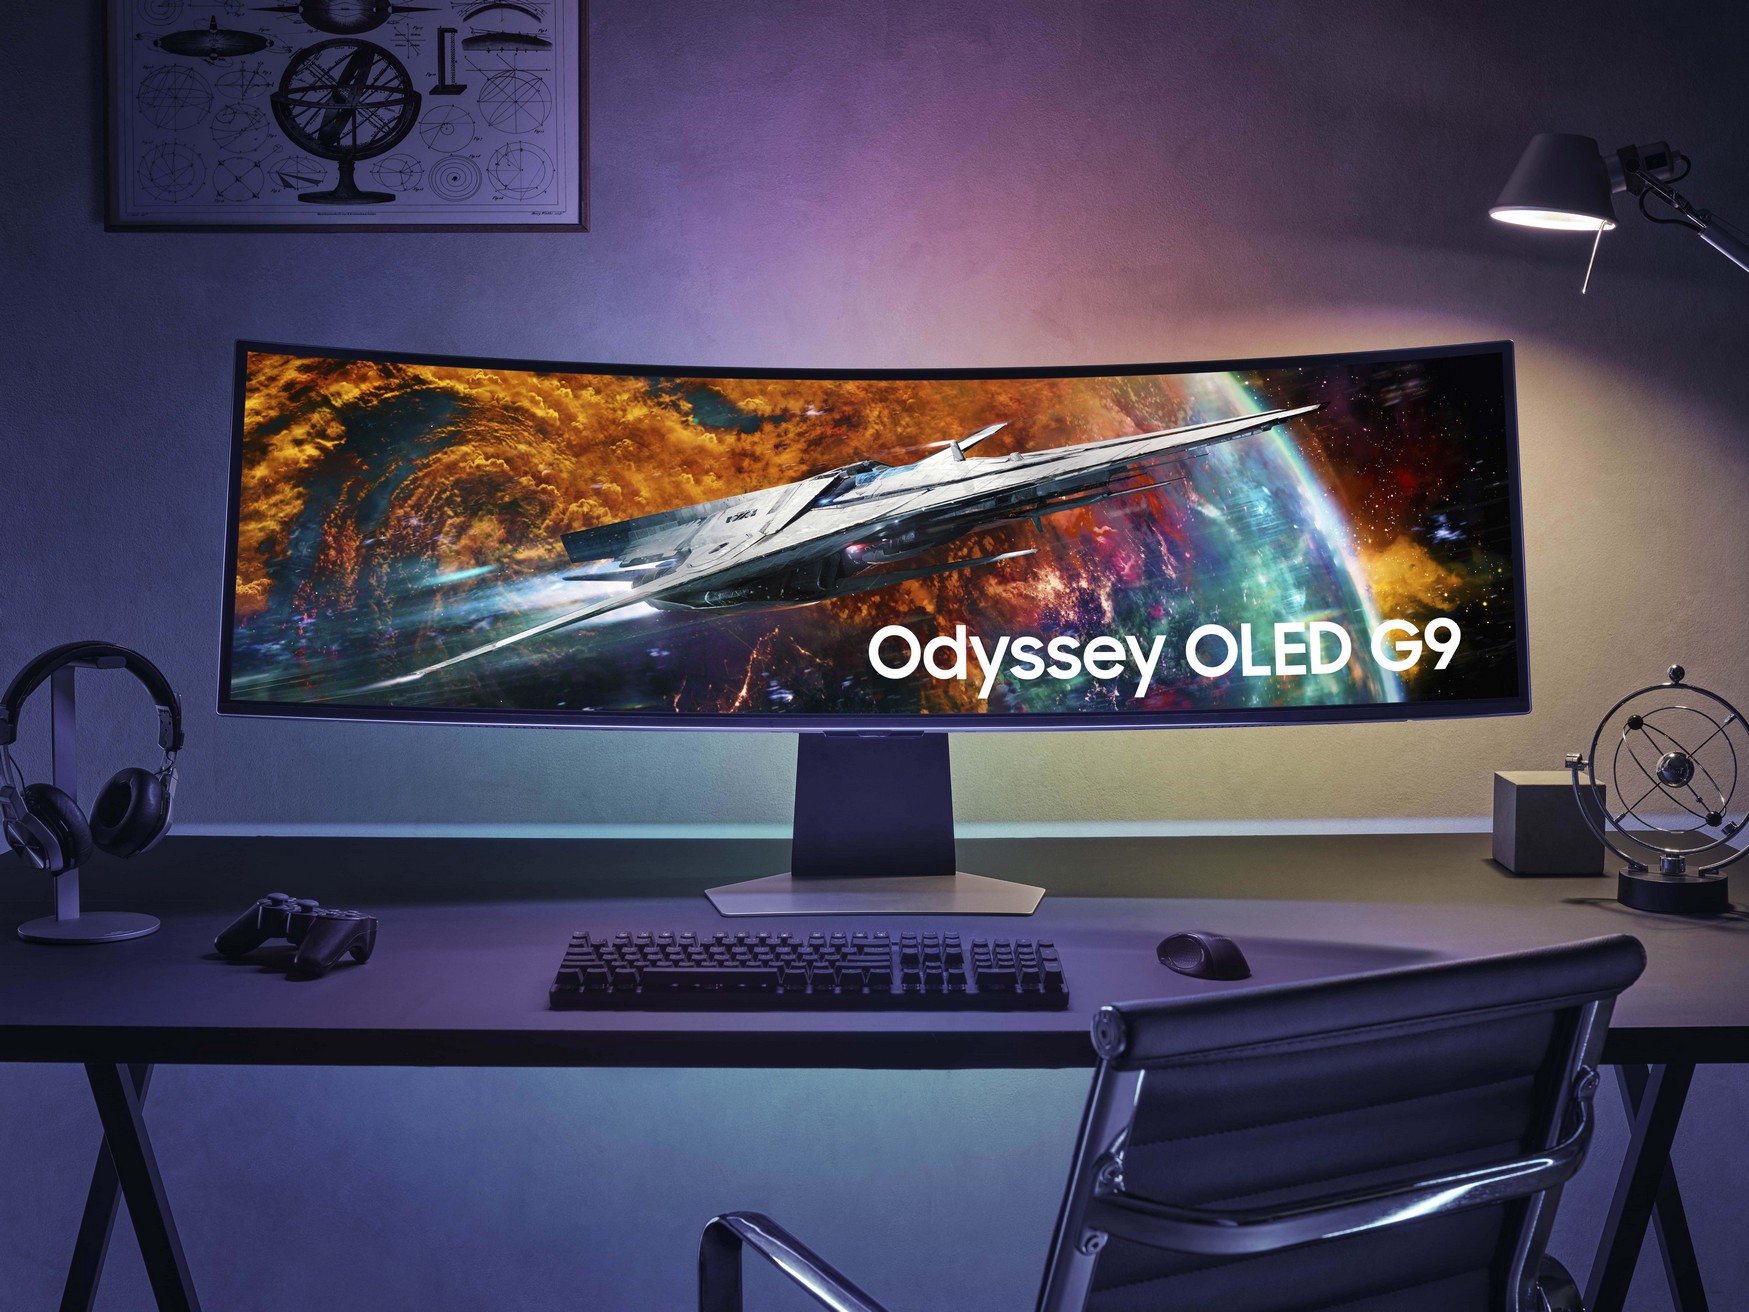 Samsung Enters A New Era Of OLED Gaming With The Australian Launch Of Odyssey OLED G9